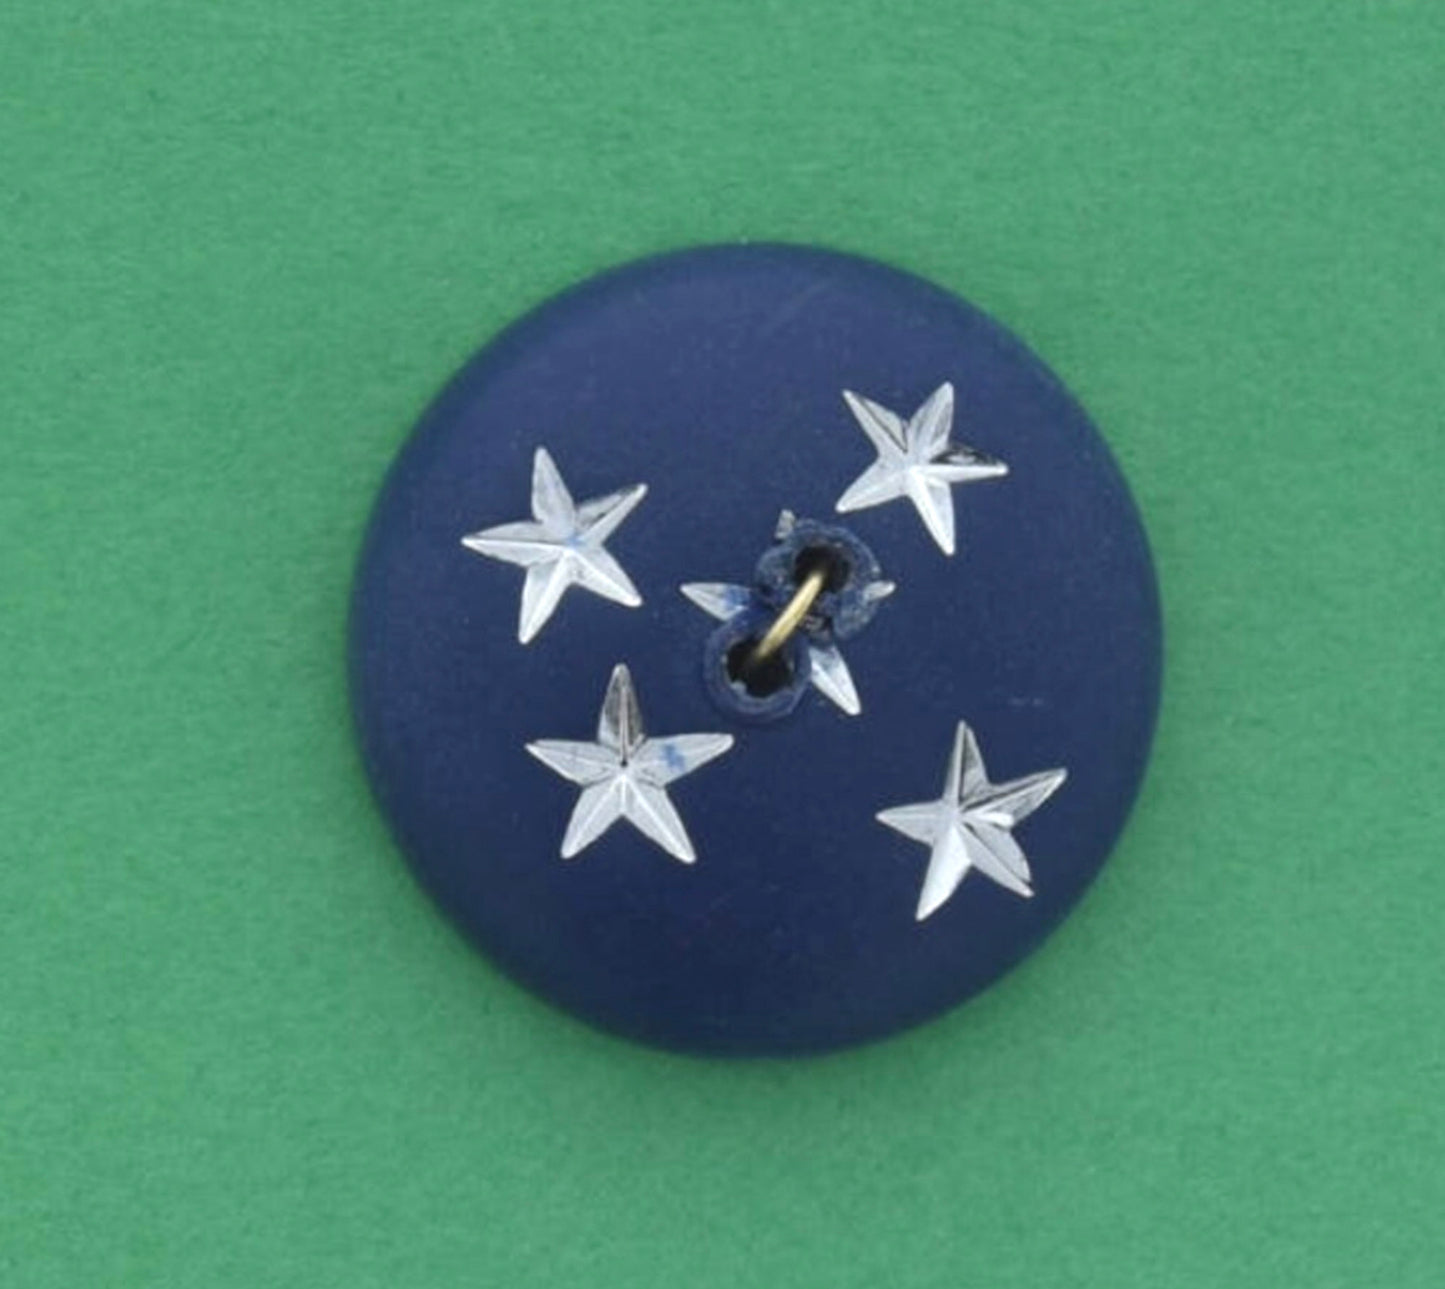 Vintage Button, 2-hole, 28mm domed round, Mykonos Navy blue with gold stars or silver stars, made in Germany, pack of 4